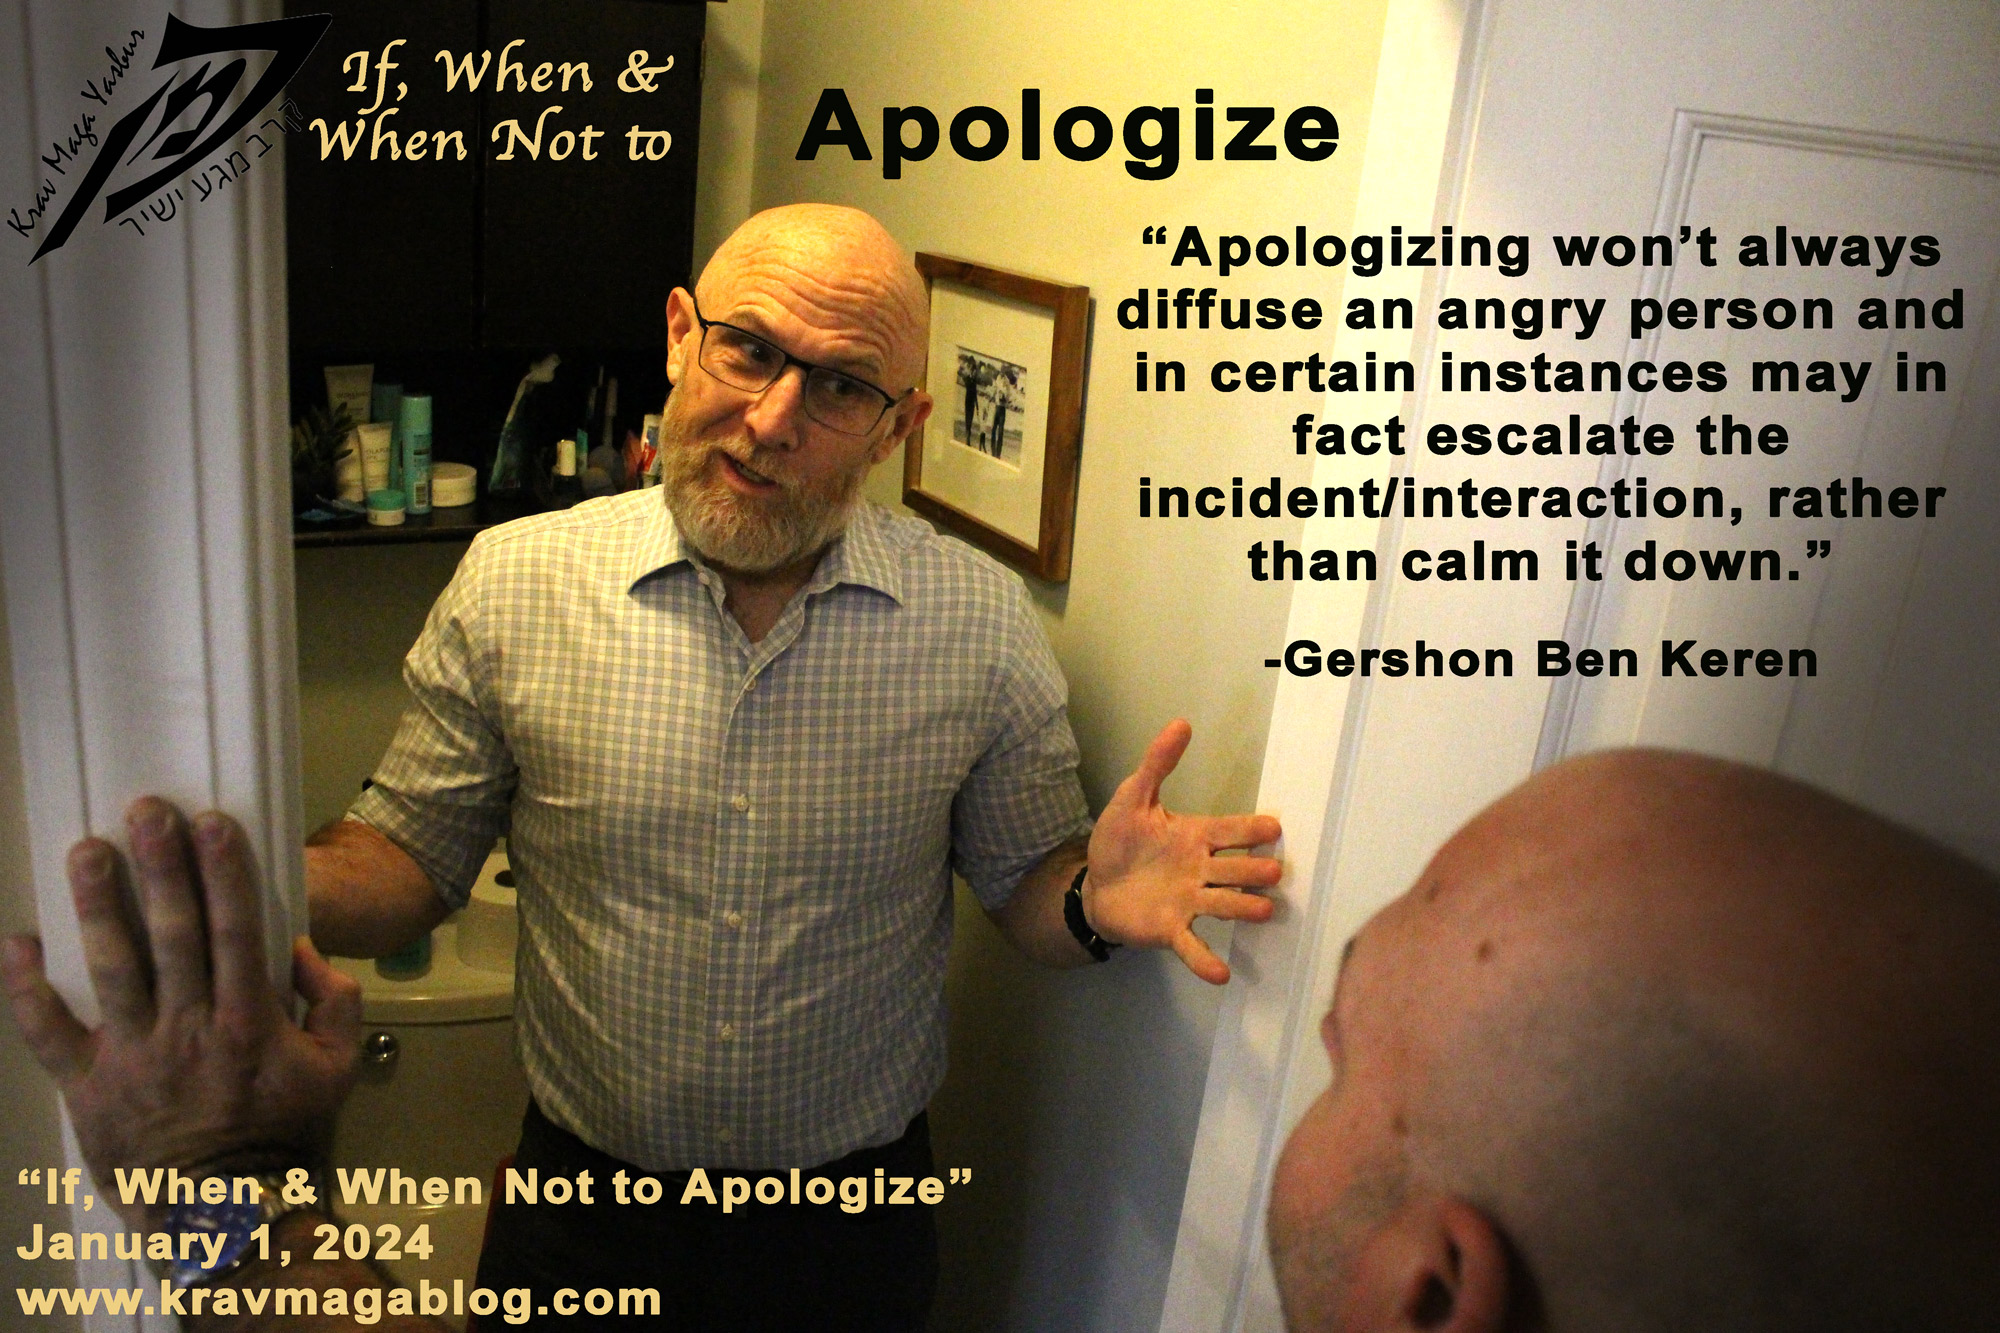 If, When & When Not to Apologize